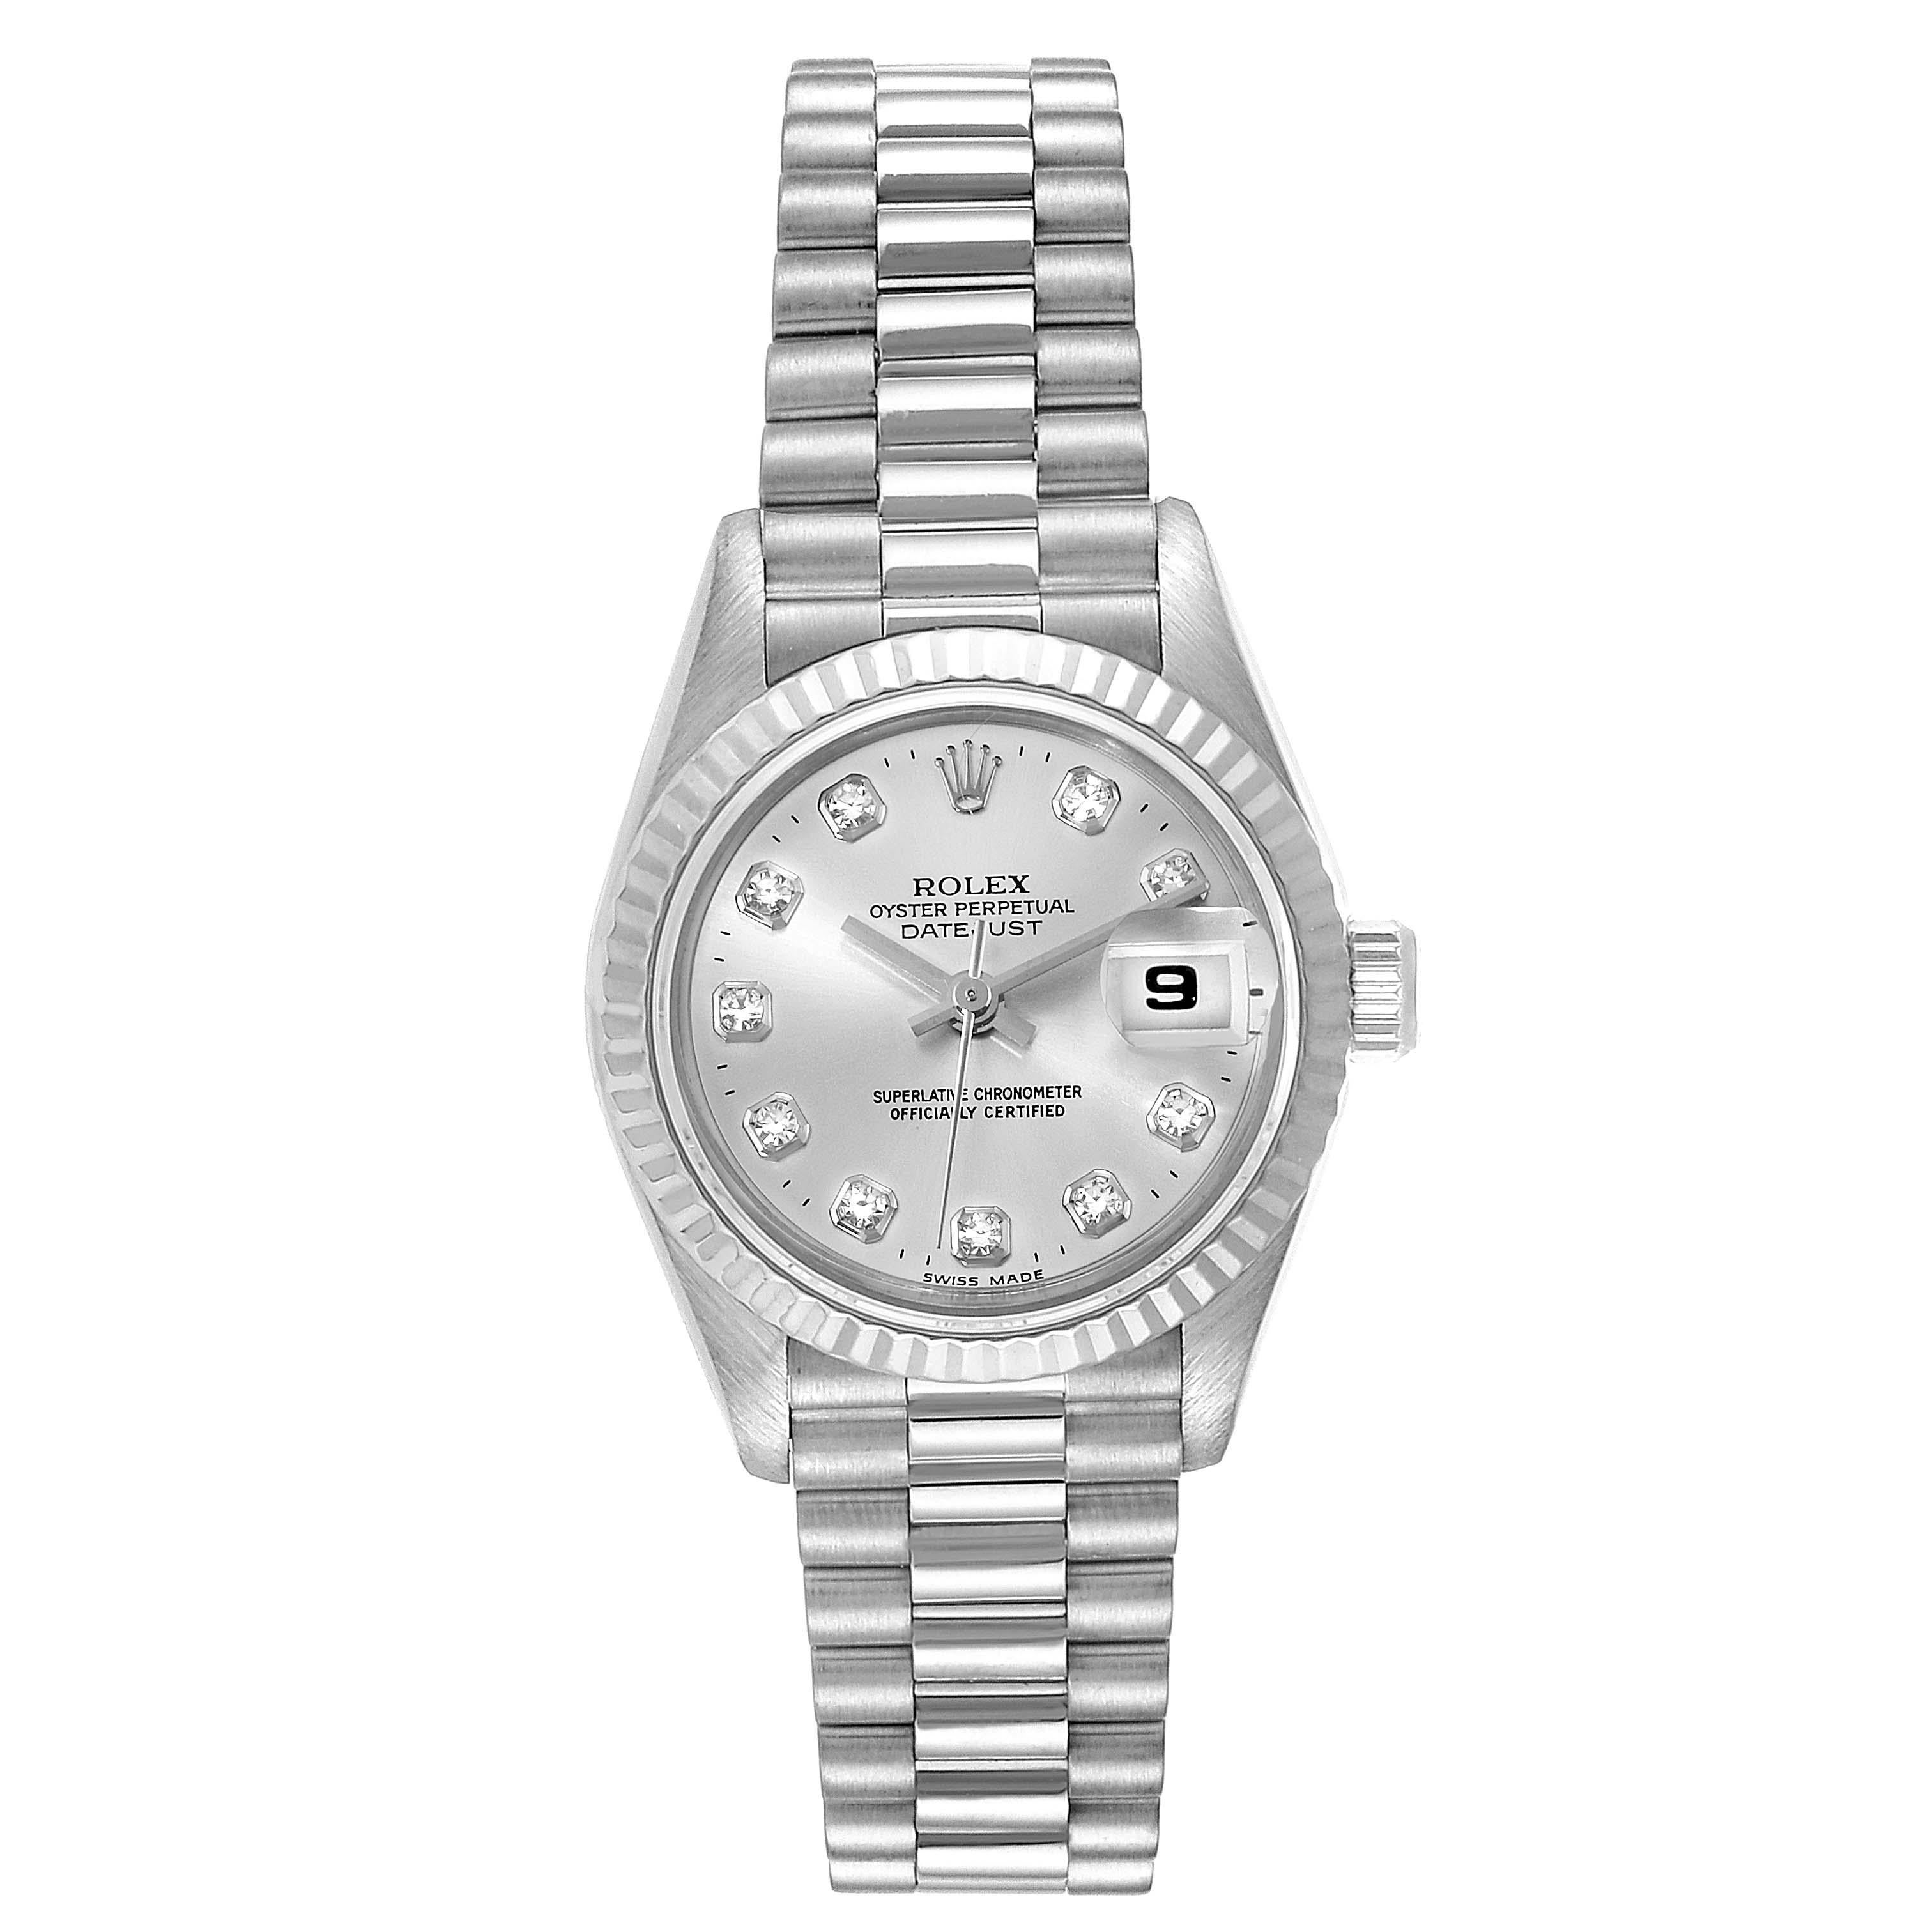 Rolex President Datejust 26 White Gold Diamond Ladies Watch 69179. Officially certified chronometer self-winding movement. 18k white gold oyster case 26.0 mm in diameter. Rolex logo on a crown. 18K white gold fluted bezel. Scratch resistant sapphire